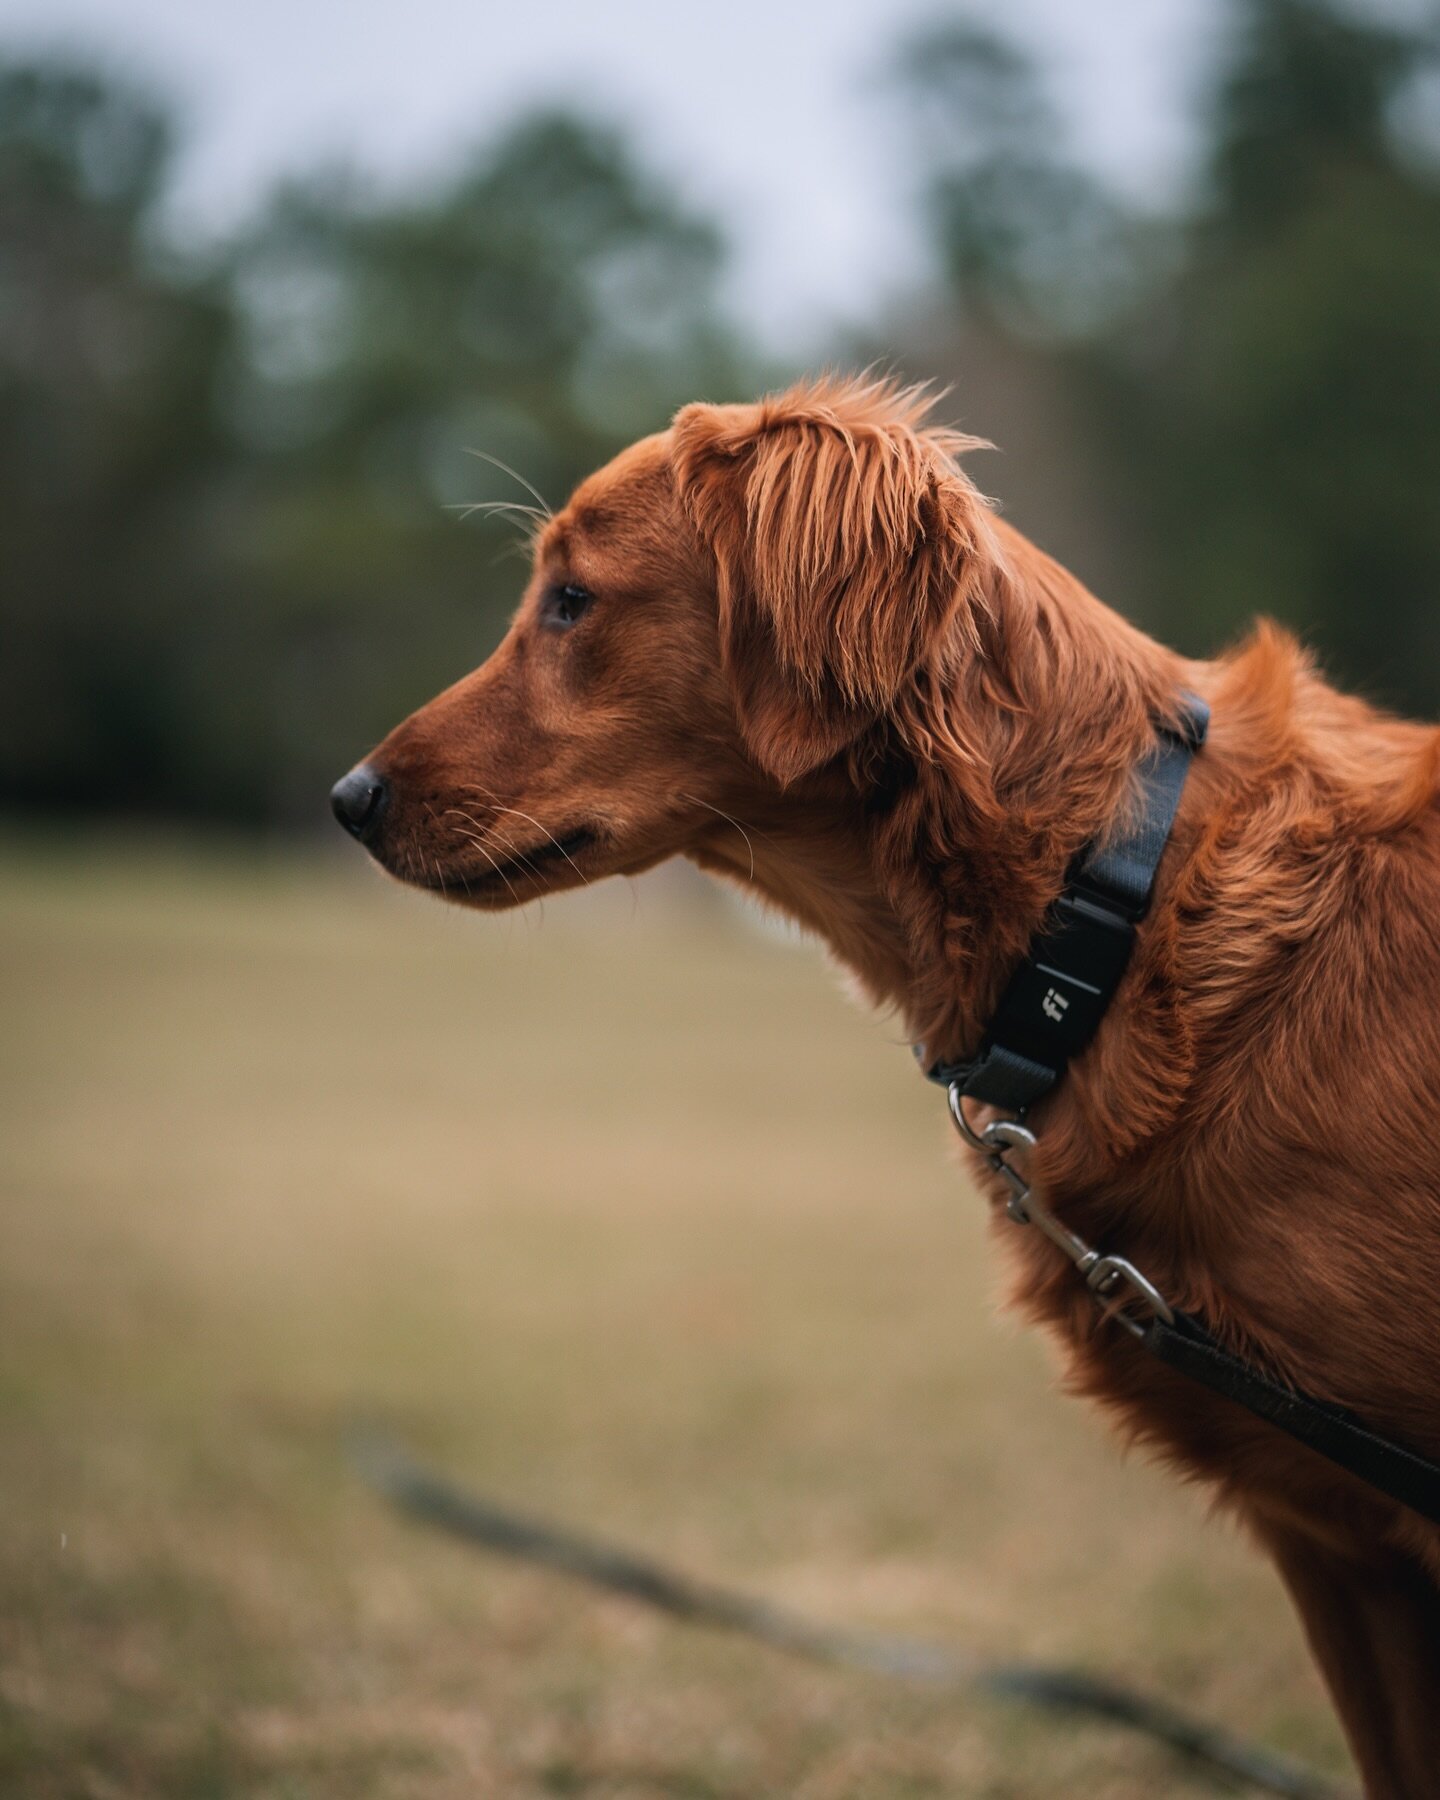 It&rsquo;s been a while since we&rsquo;ve talked!

We&rsquo;ve been doing a lot behind the scenes at EK9S. With the new year we&rsquo;ve rolled out some new programs and policies.

One being that we now use @fi.dogs GPS tracking collars in our progra